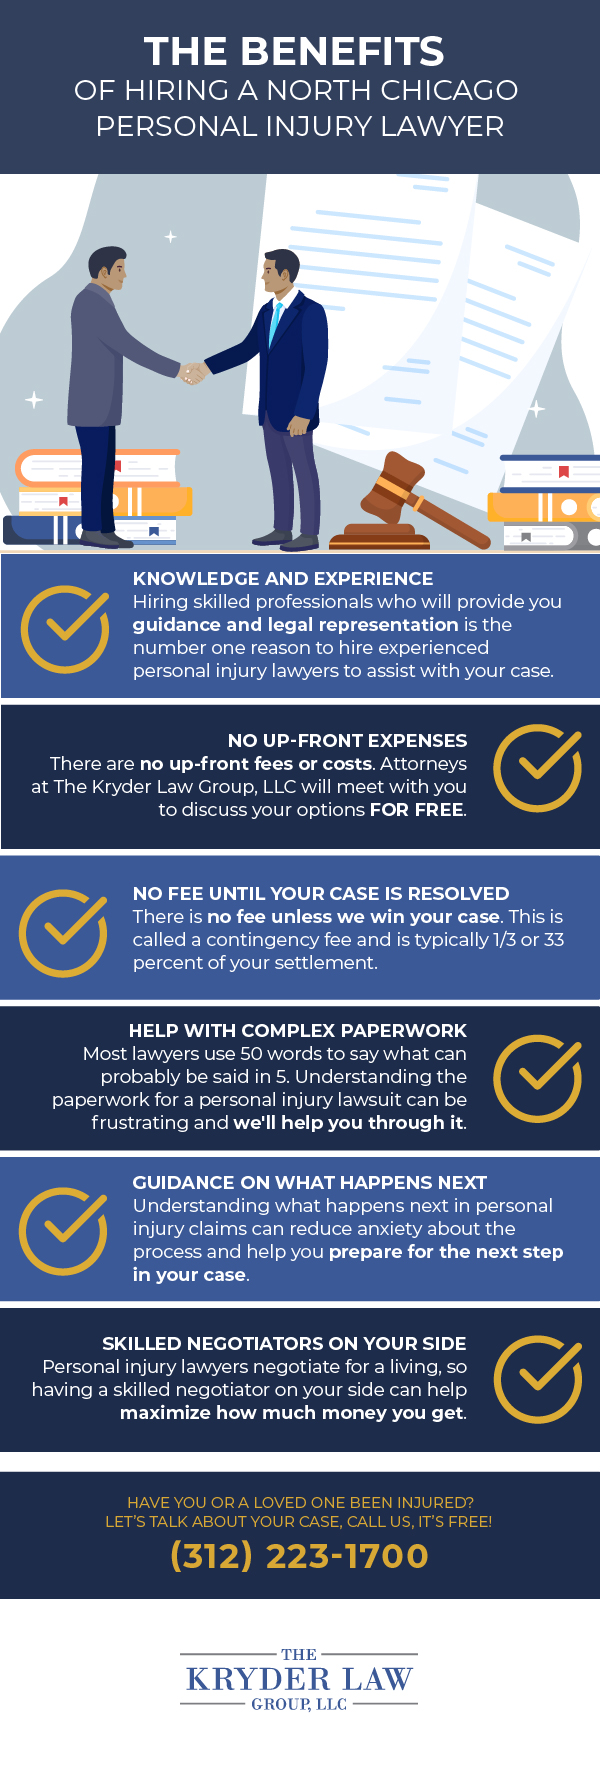 The Benefits of Hiring a North Chicago Personal Injury Lawyer Infographic